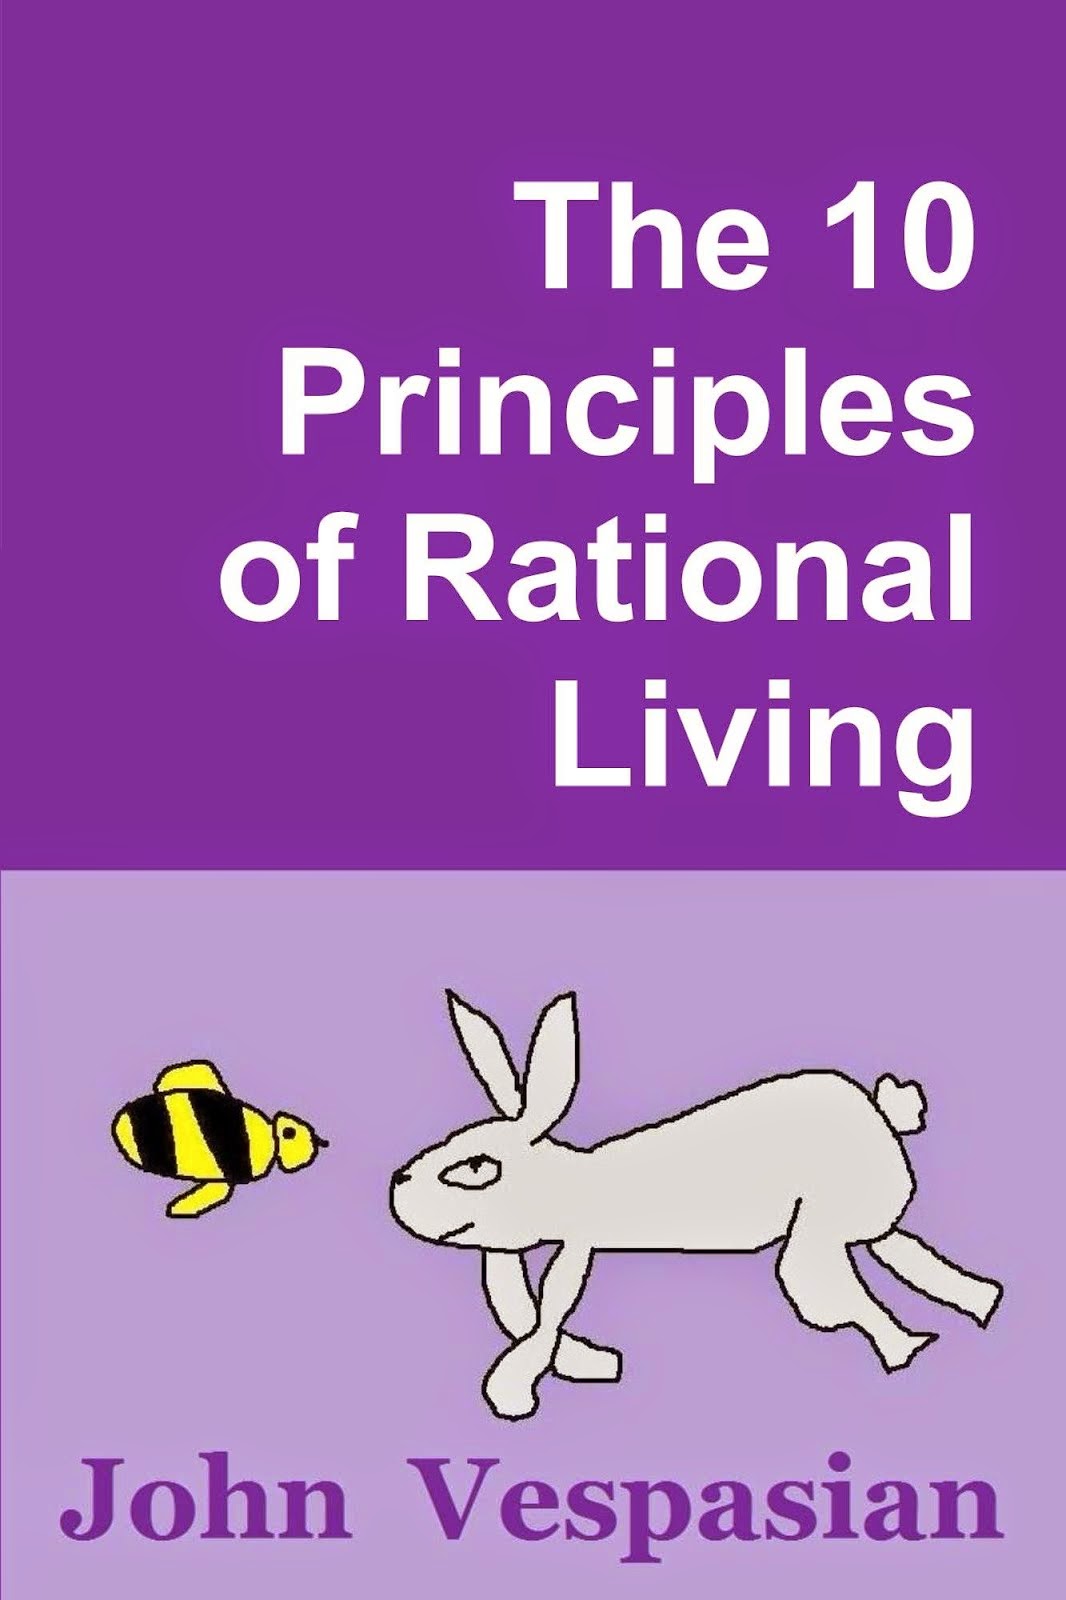 The 10 principles of rational living